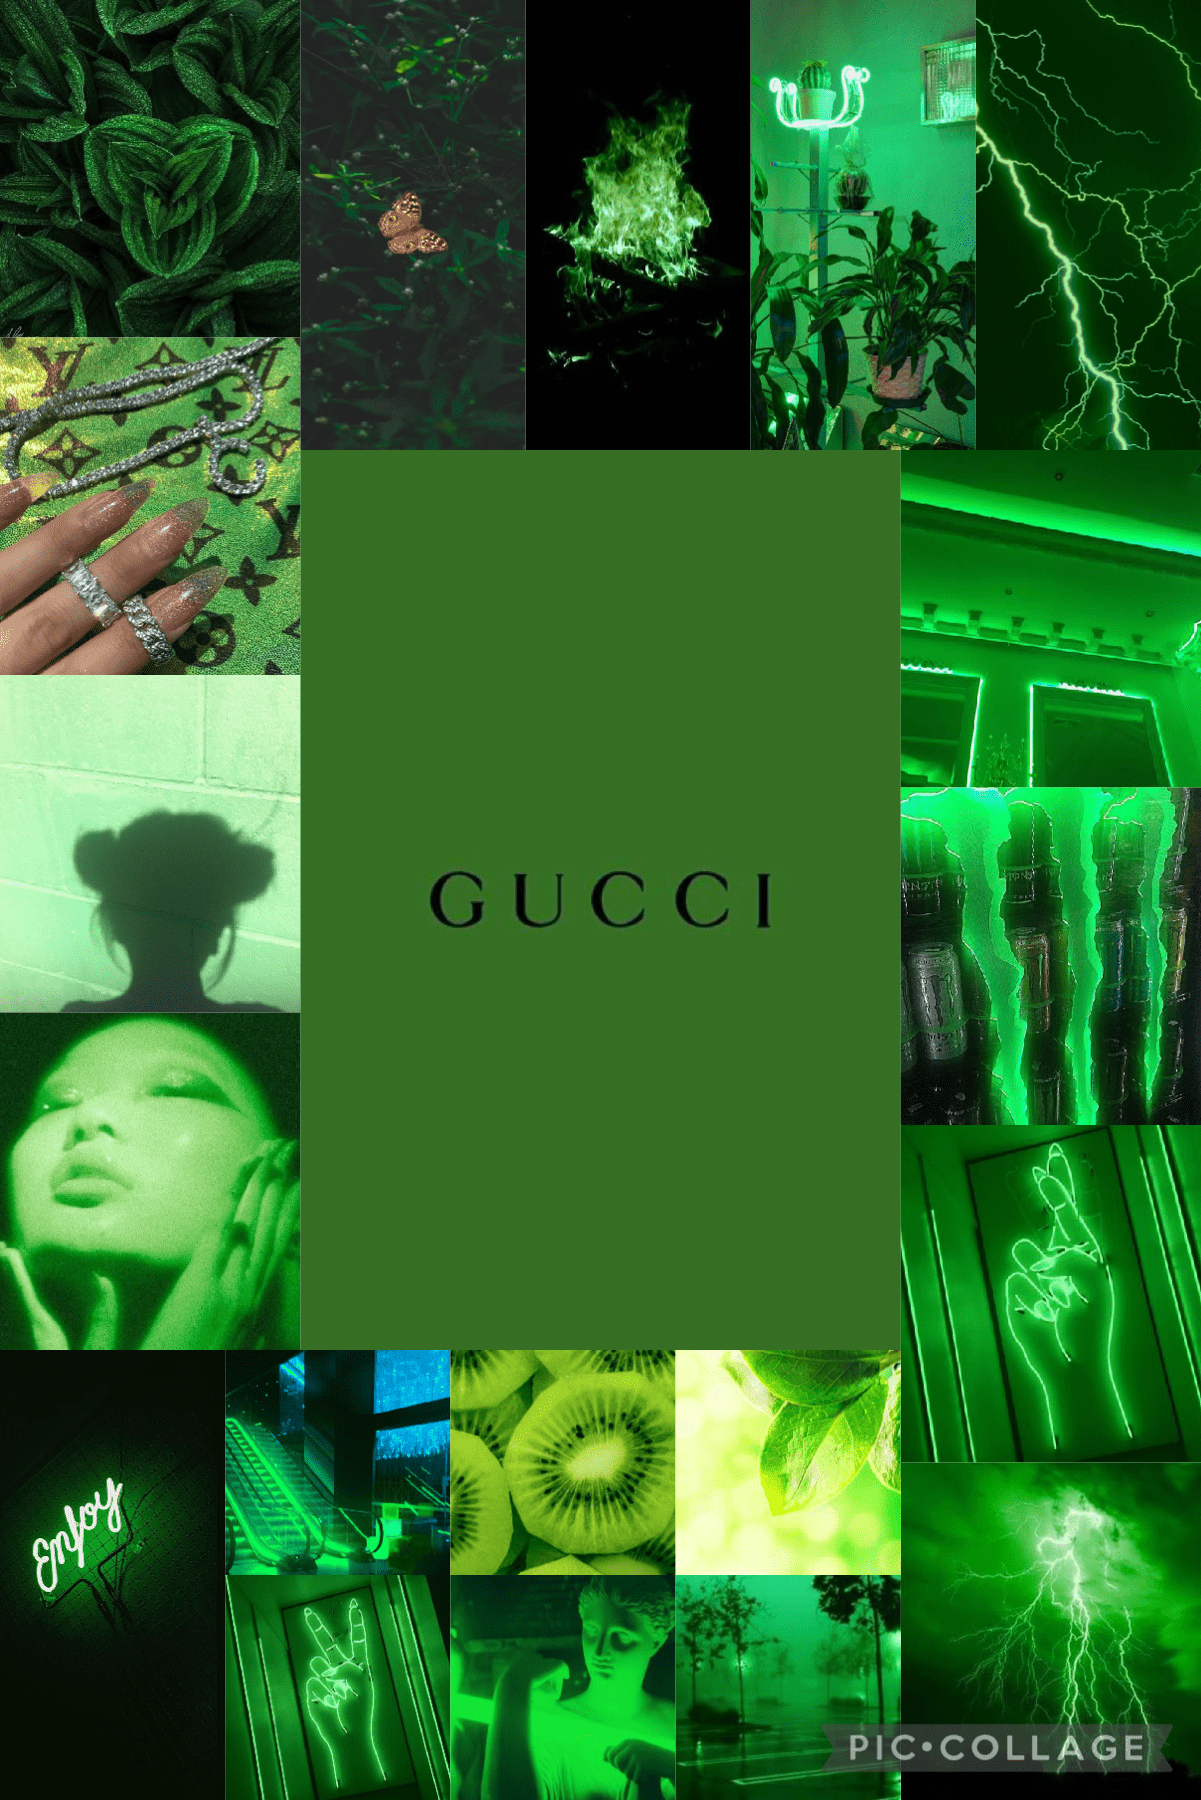 Aesthetic Green Gucci Wallpaper I Made For My Phone - Lime green, Gucci